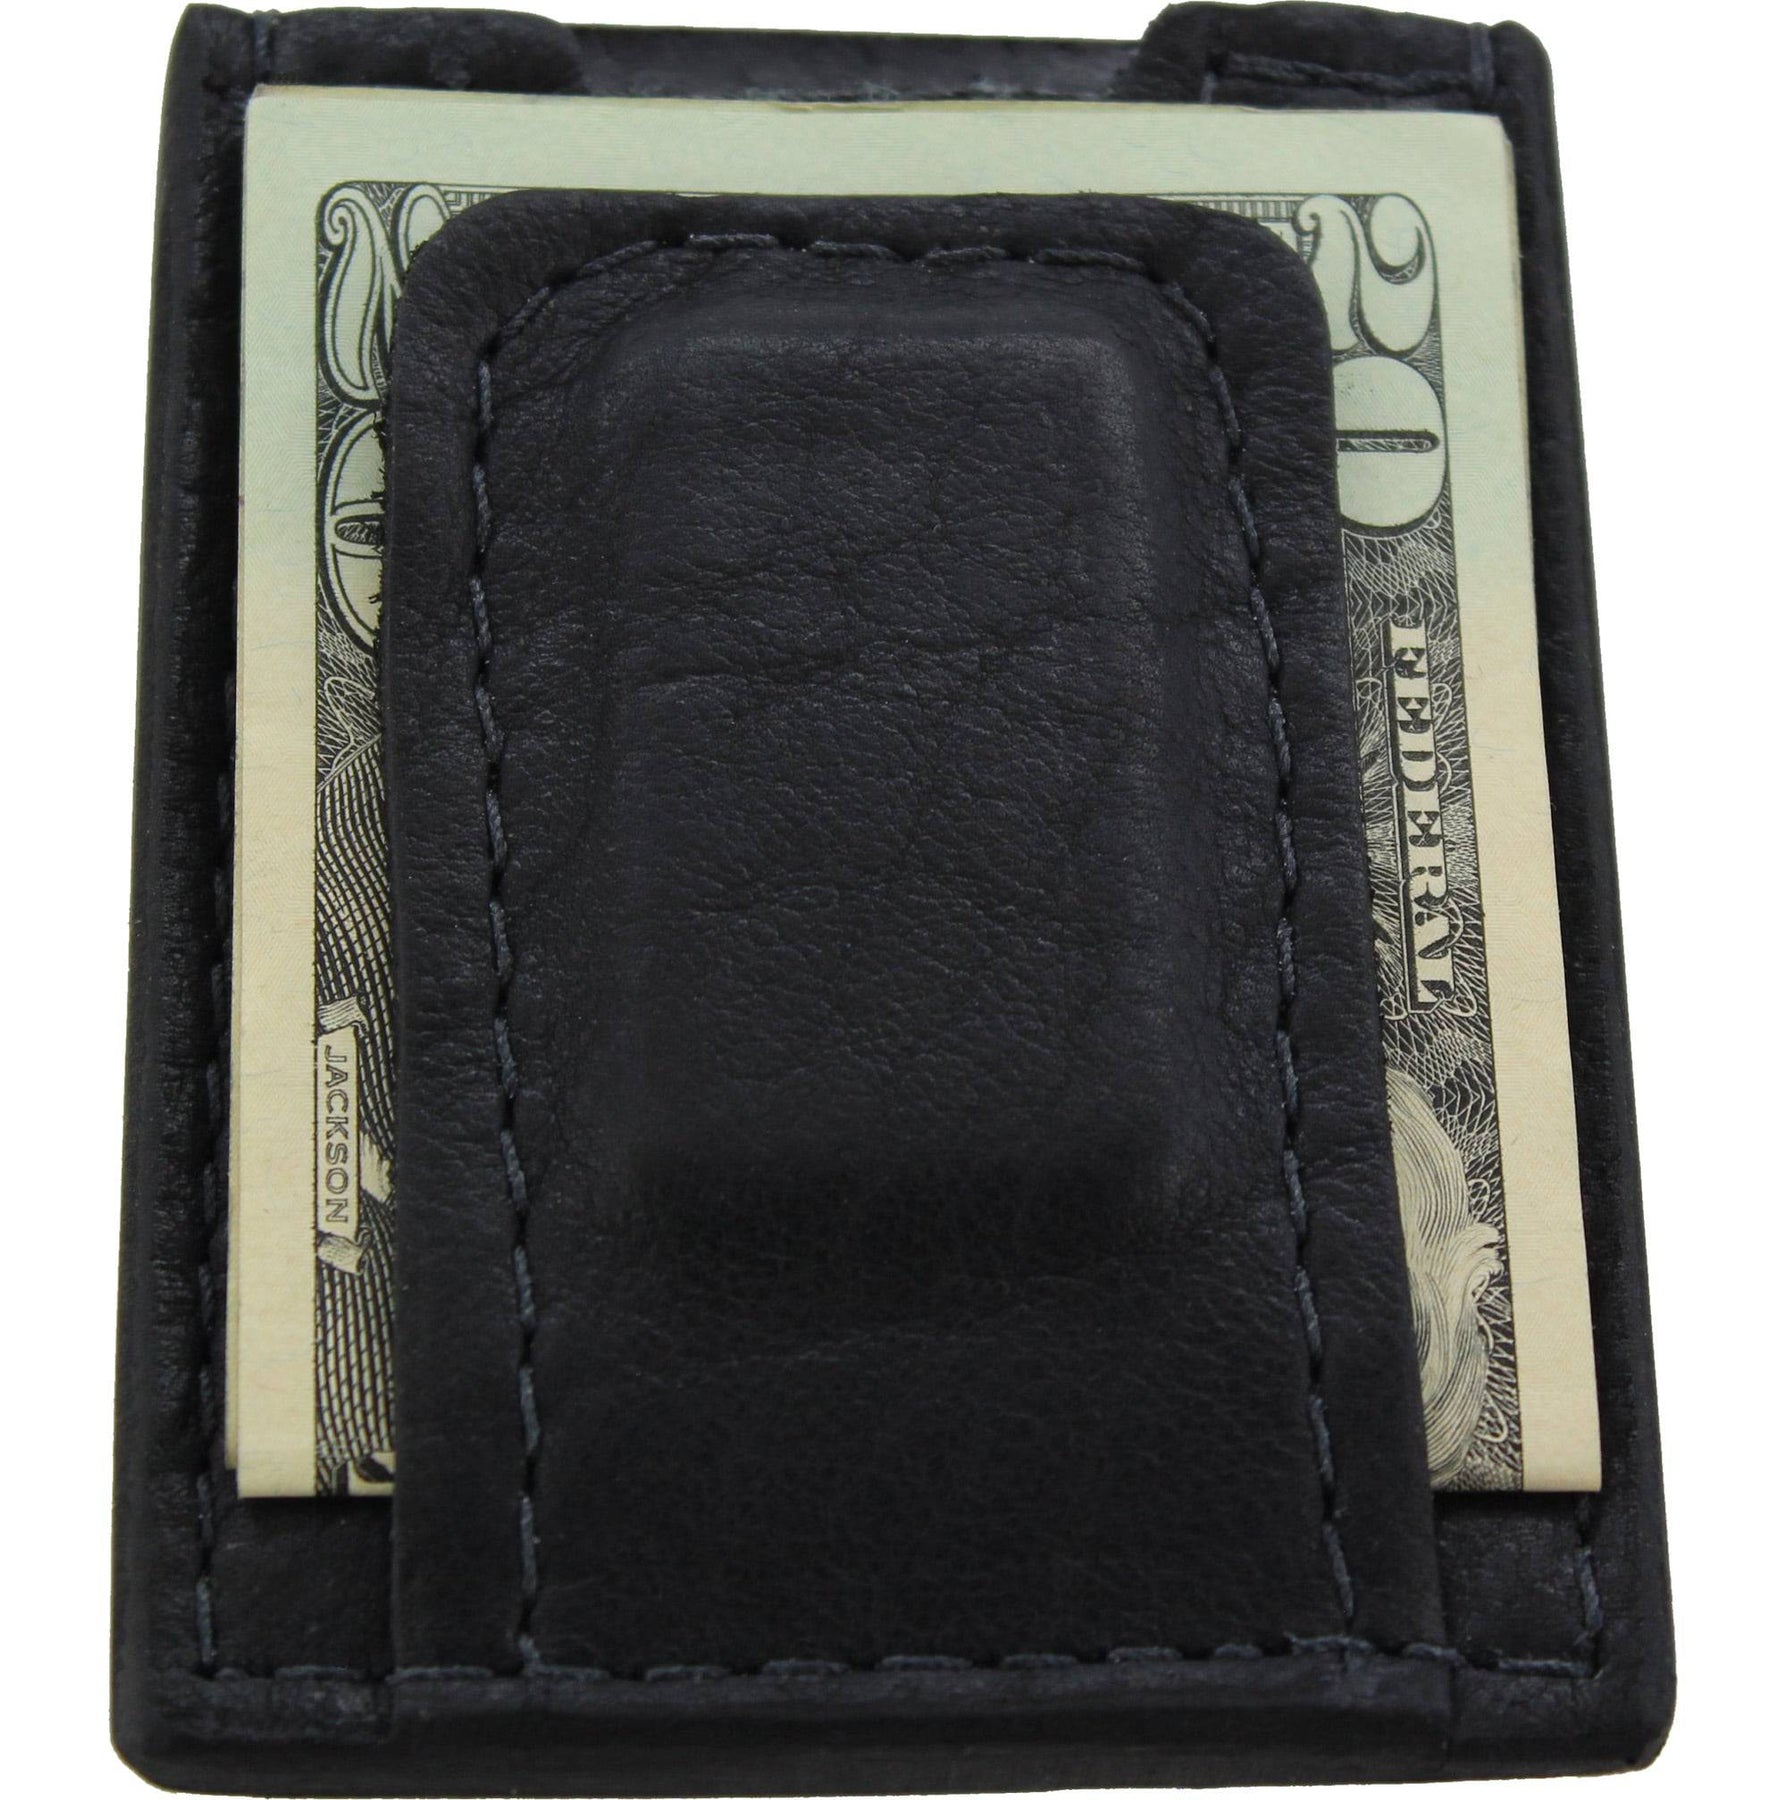 Dollaro RFID Protected Money Clip Wallet with Coin Pocket - Black